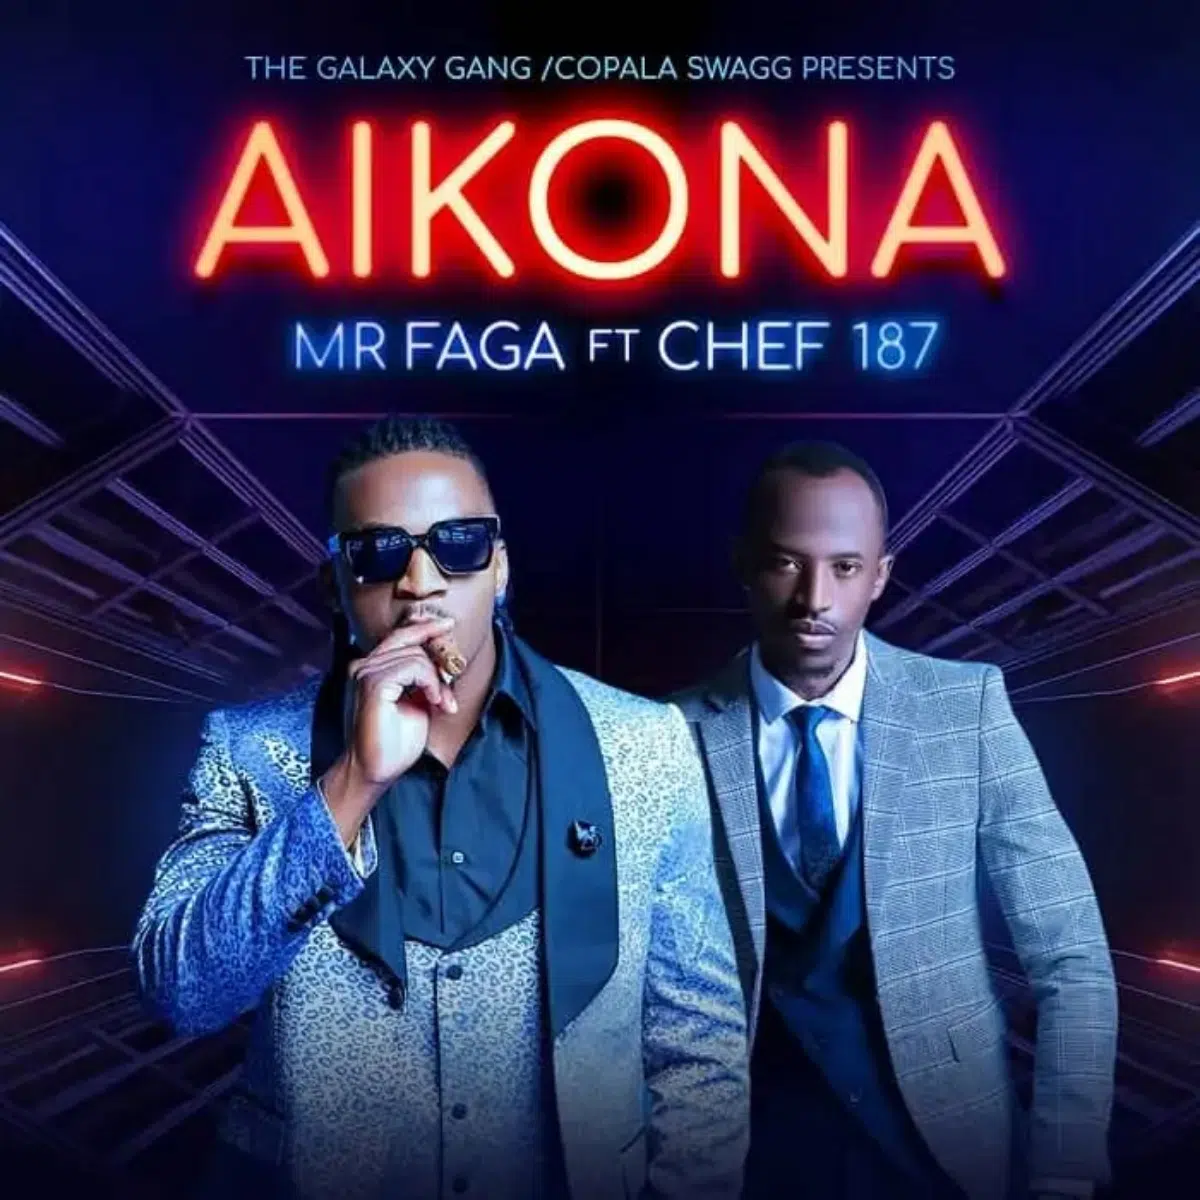 DOWNLOAD: Mr Faga Ft Chef 187 – “AIKONA” (Don’t try This At Home) Mp3